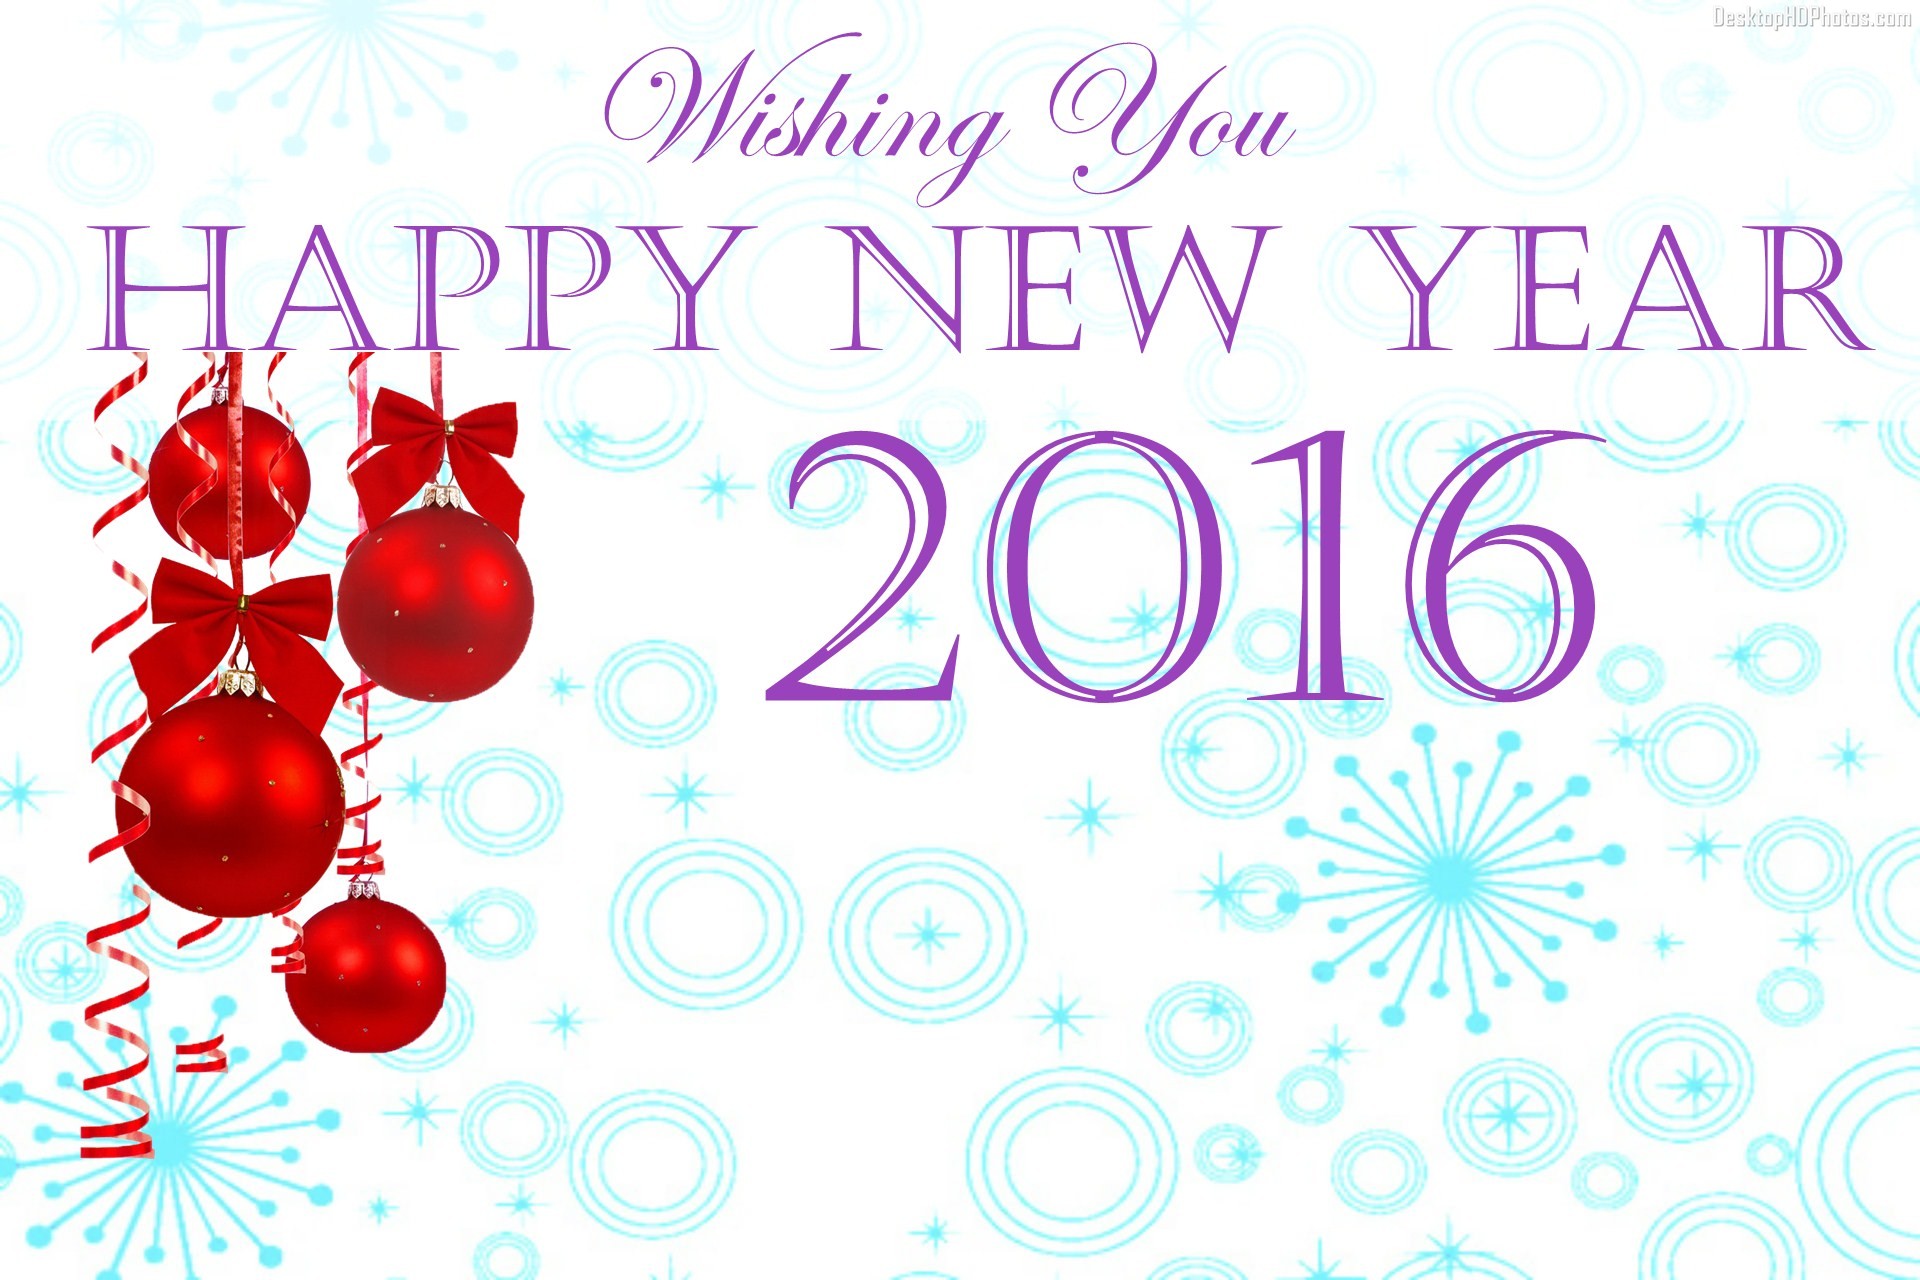 Happy New Year 2016 Wallpapers Photography Click As Your Mod 1920x1280